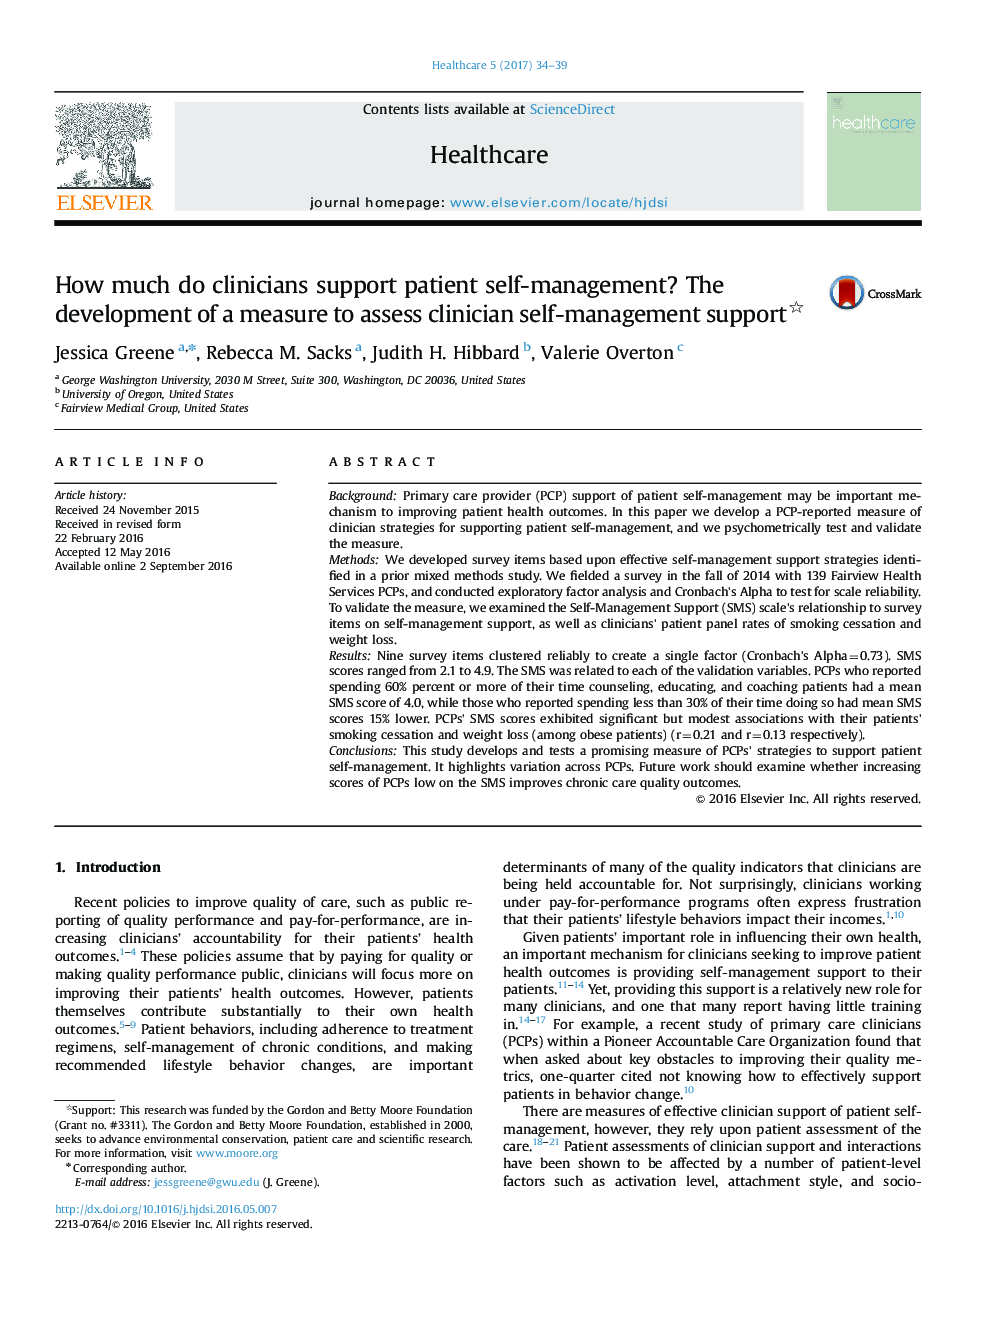 How much do clinicians support patient self-management? The development of a measure to assess clinician self-management support